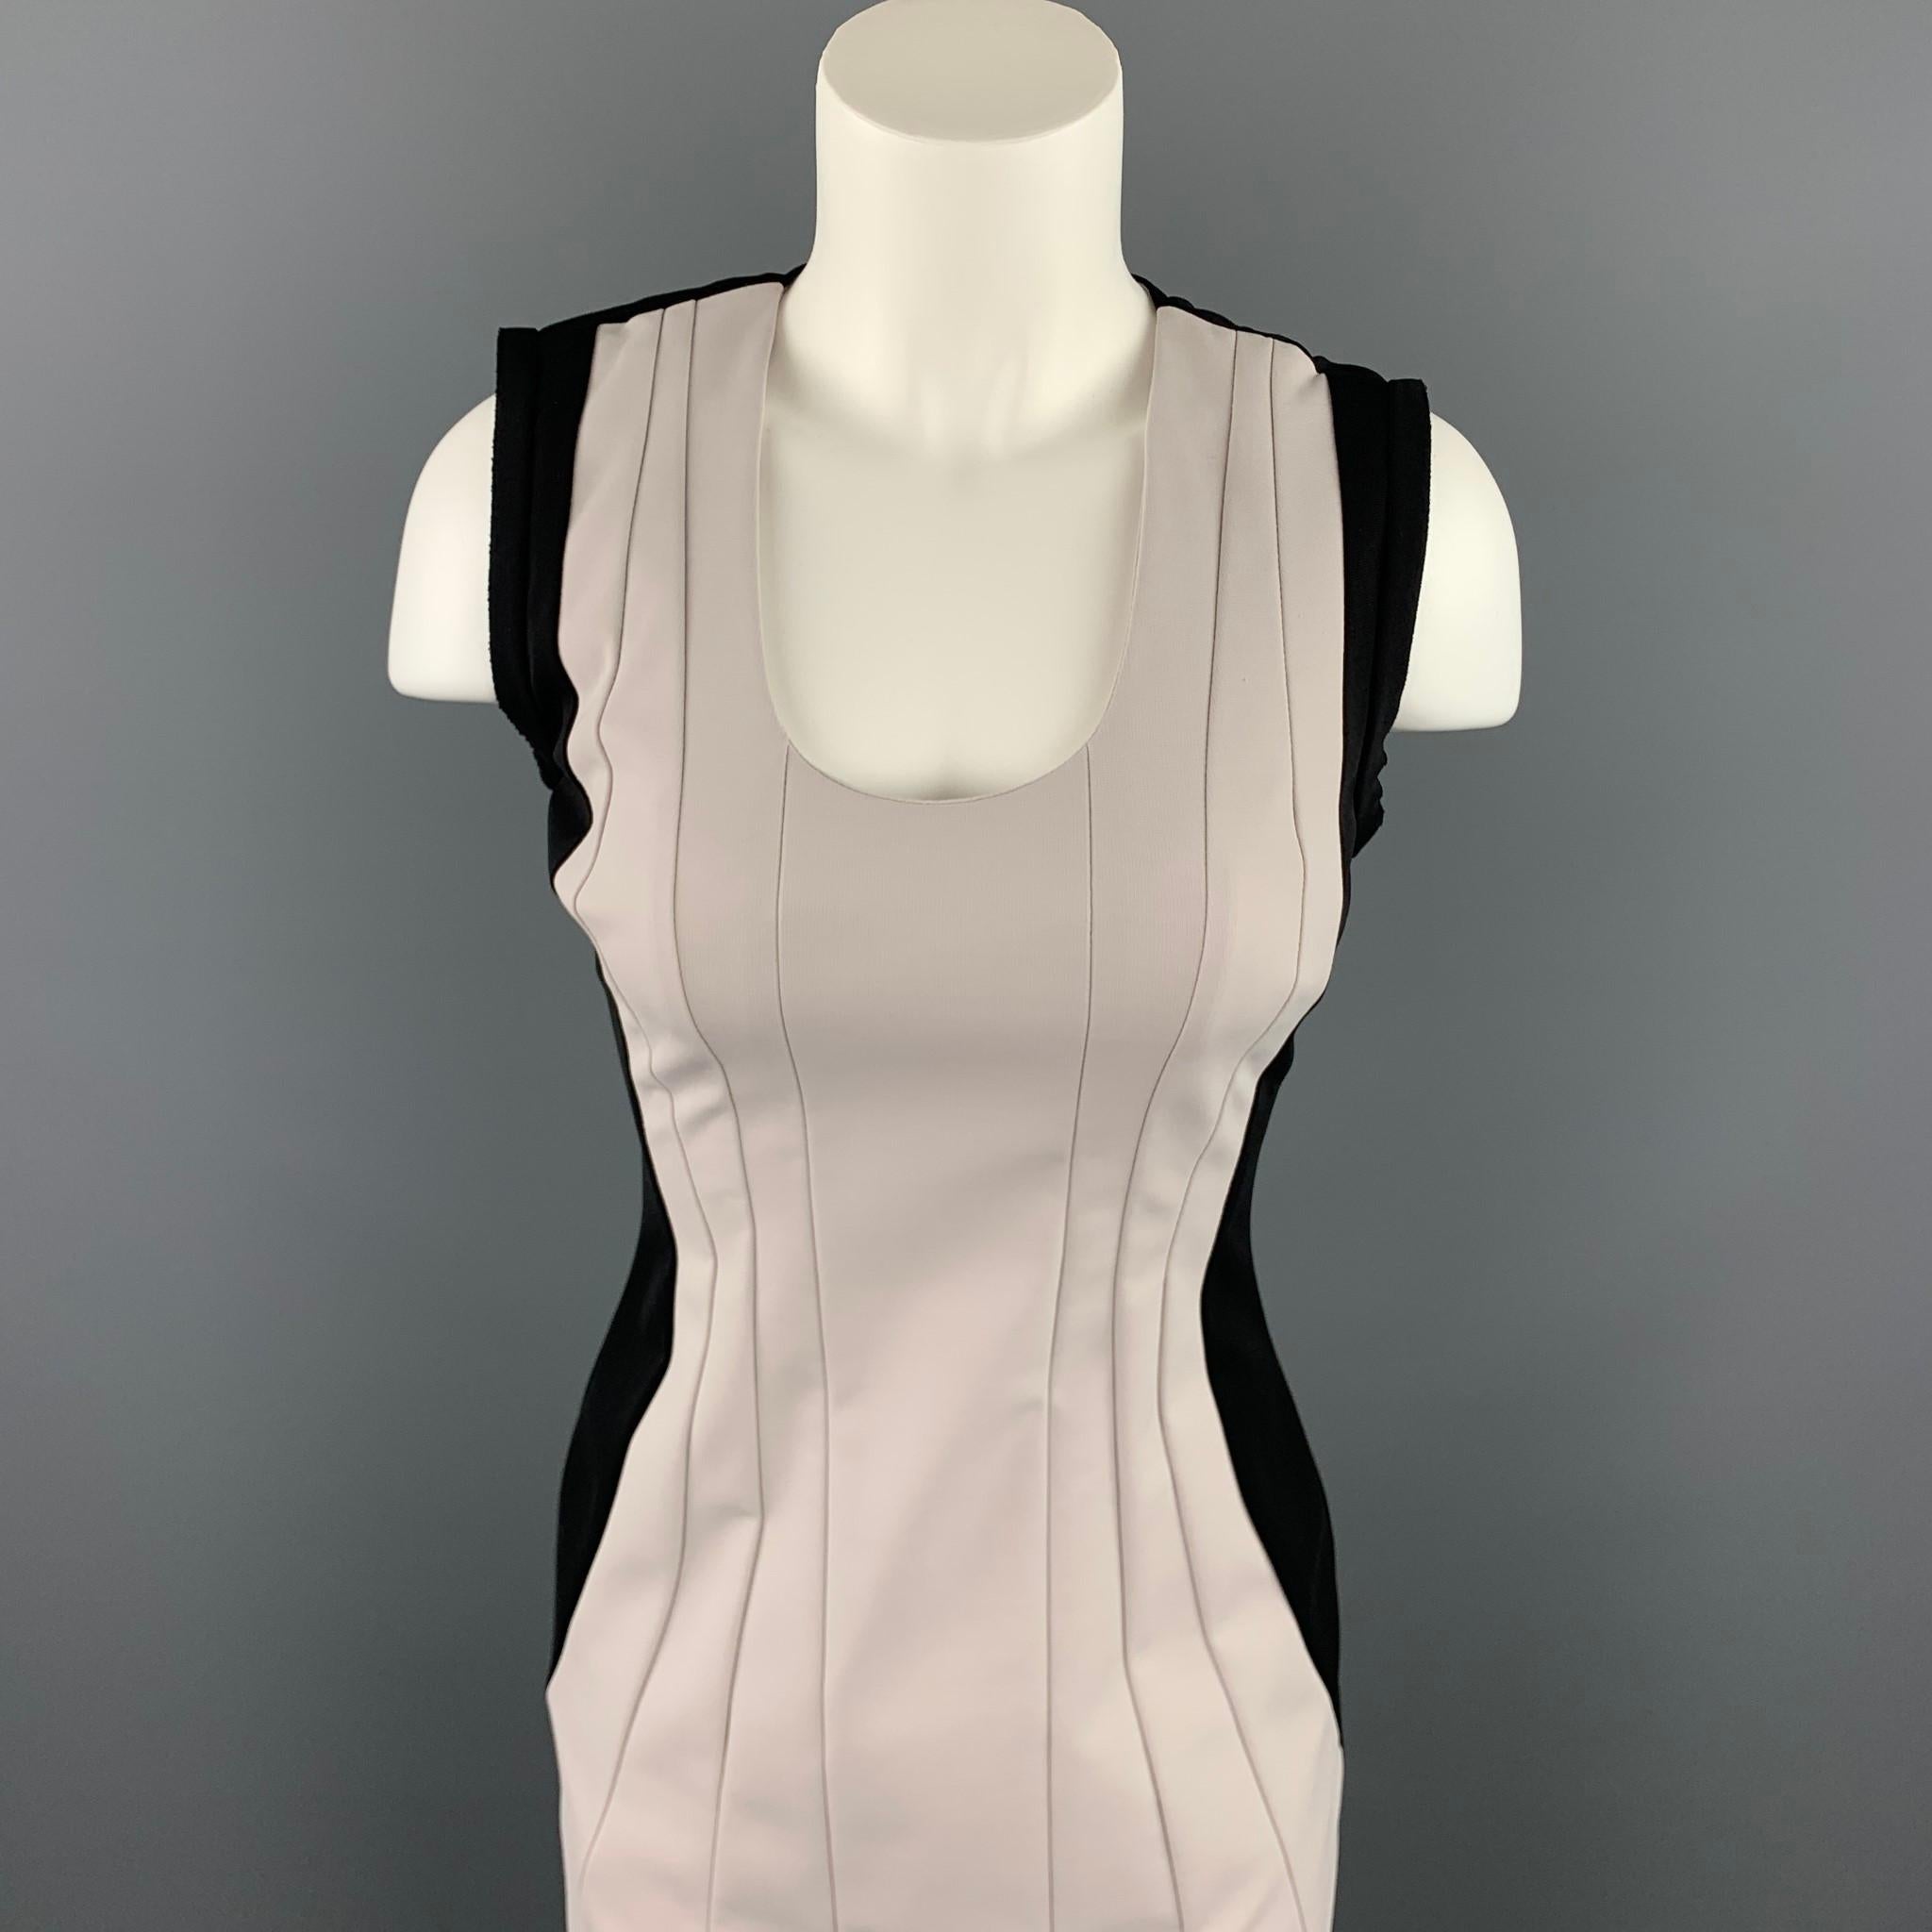 DIANE VON FURSTENBERG dress comes in a cream & black pleated polyamide featuring a sheath style, scoop neck, and a back zip up closure. 

Good Pre-Owned Condition.
Marked: 2

Measurements:

Shoulder: 14.5 in. 
Bust: 28 in. 
Waist: 25 in. 
Hip: 30